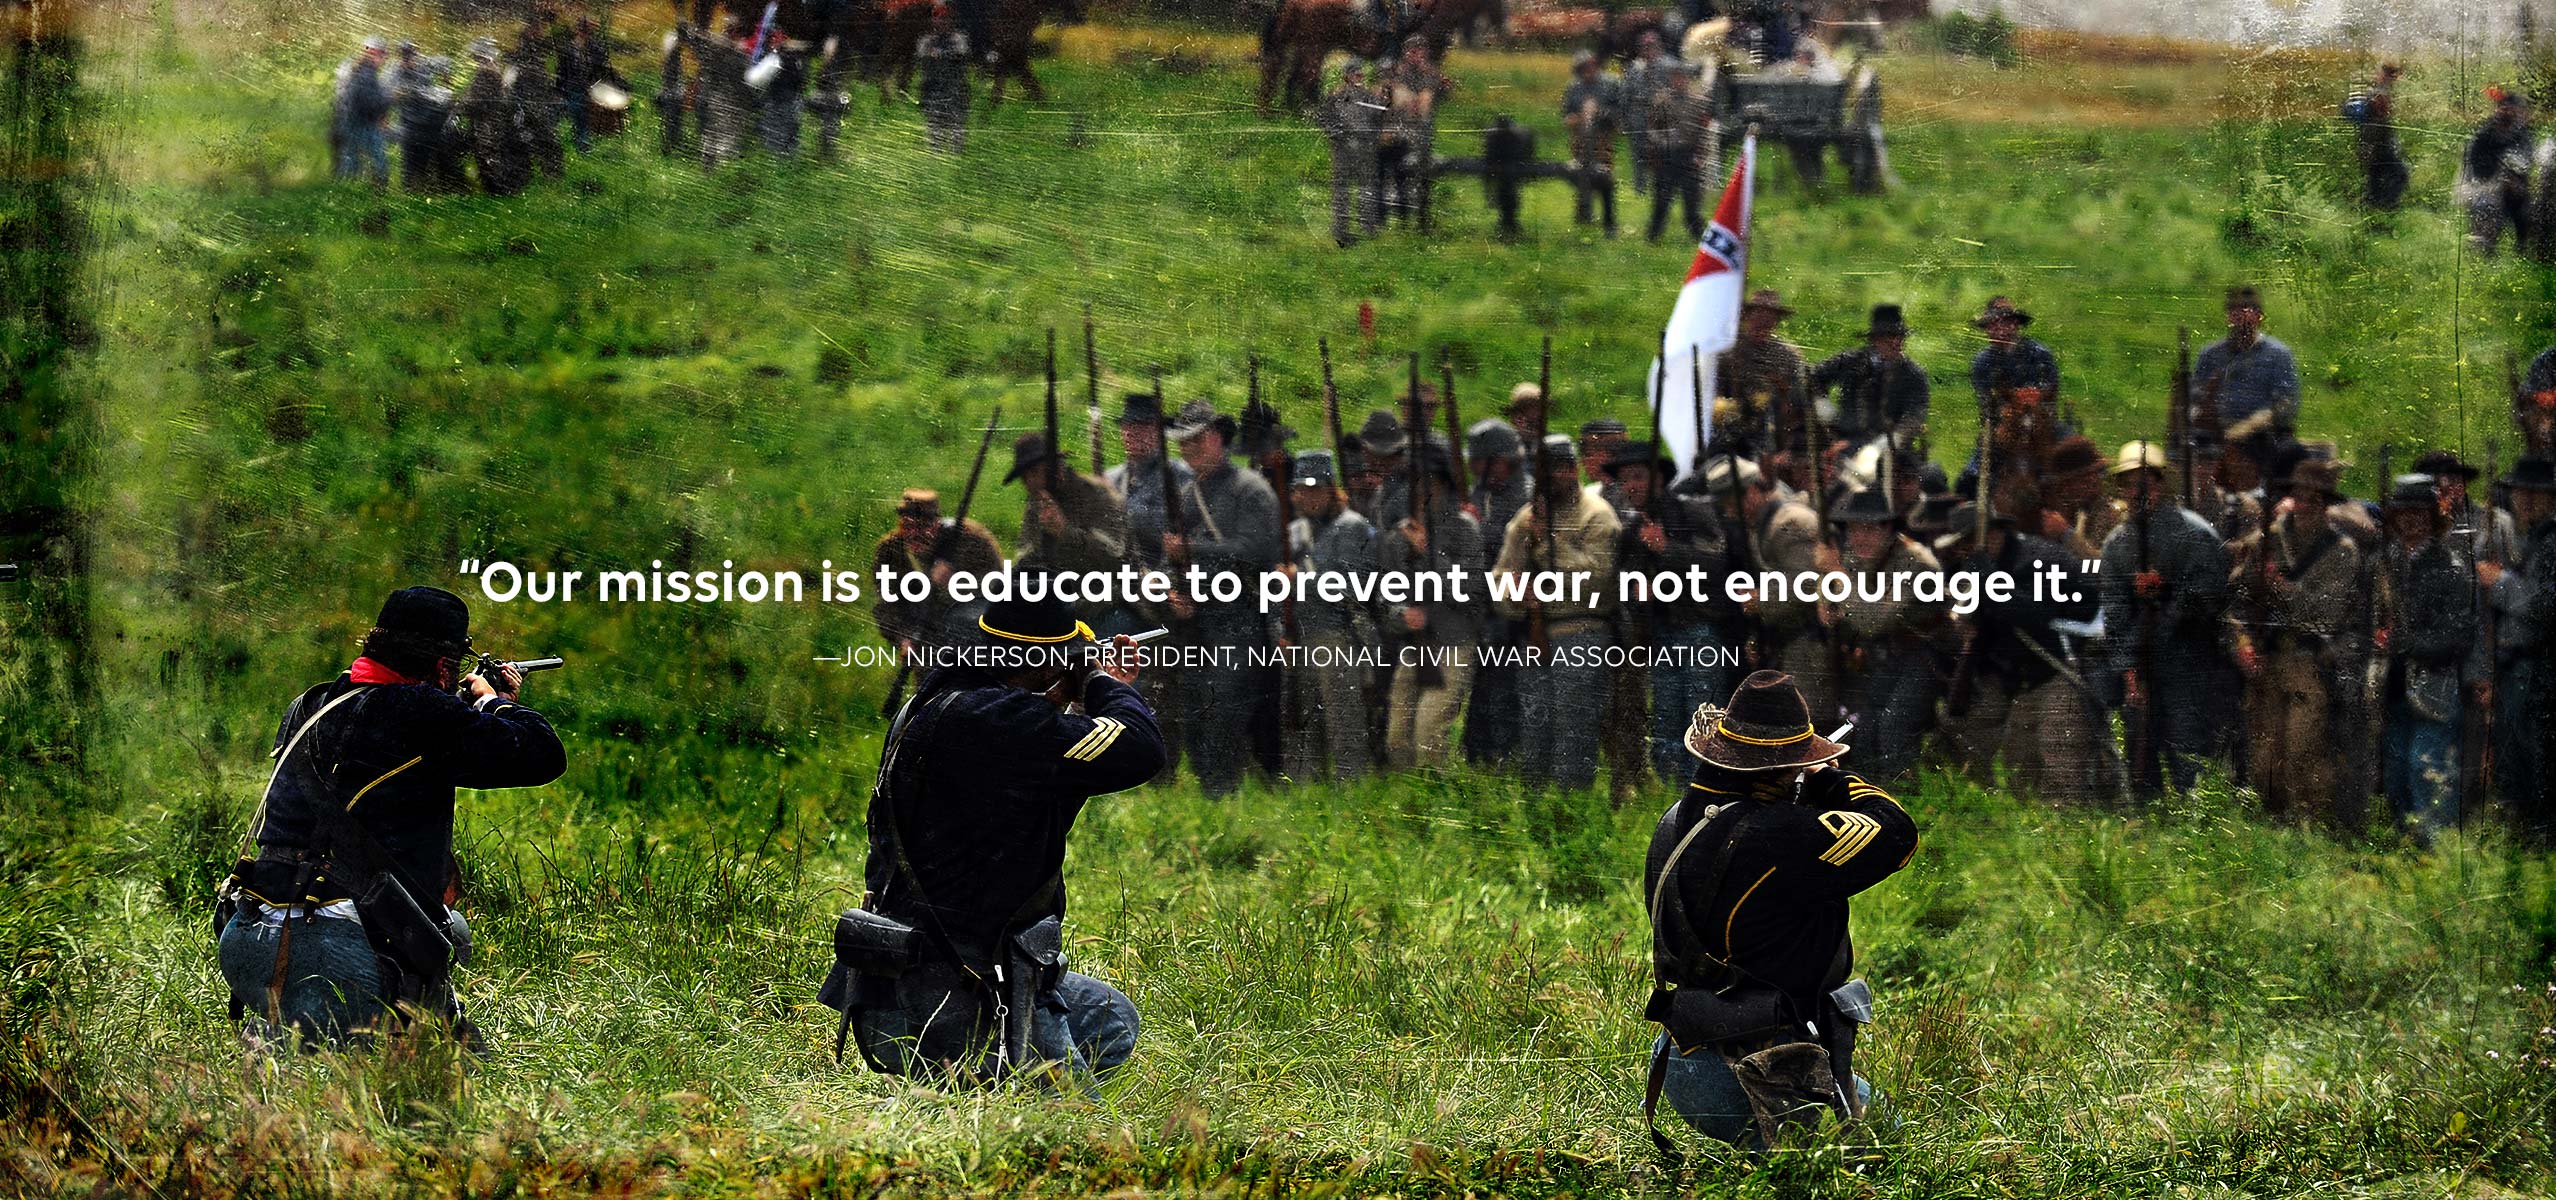 Our mission is to educate to prevent war, not encourage it.